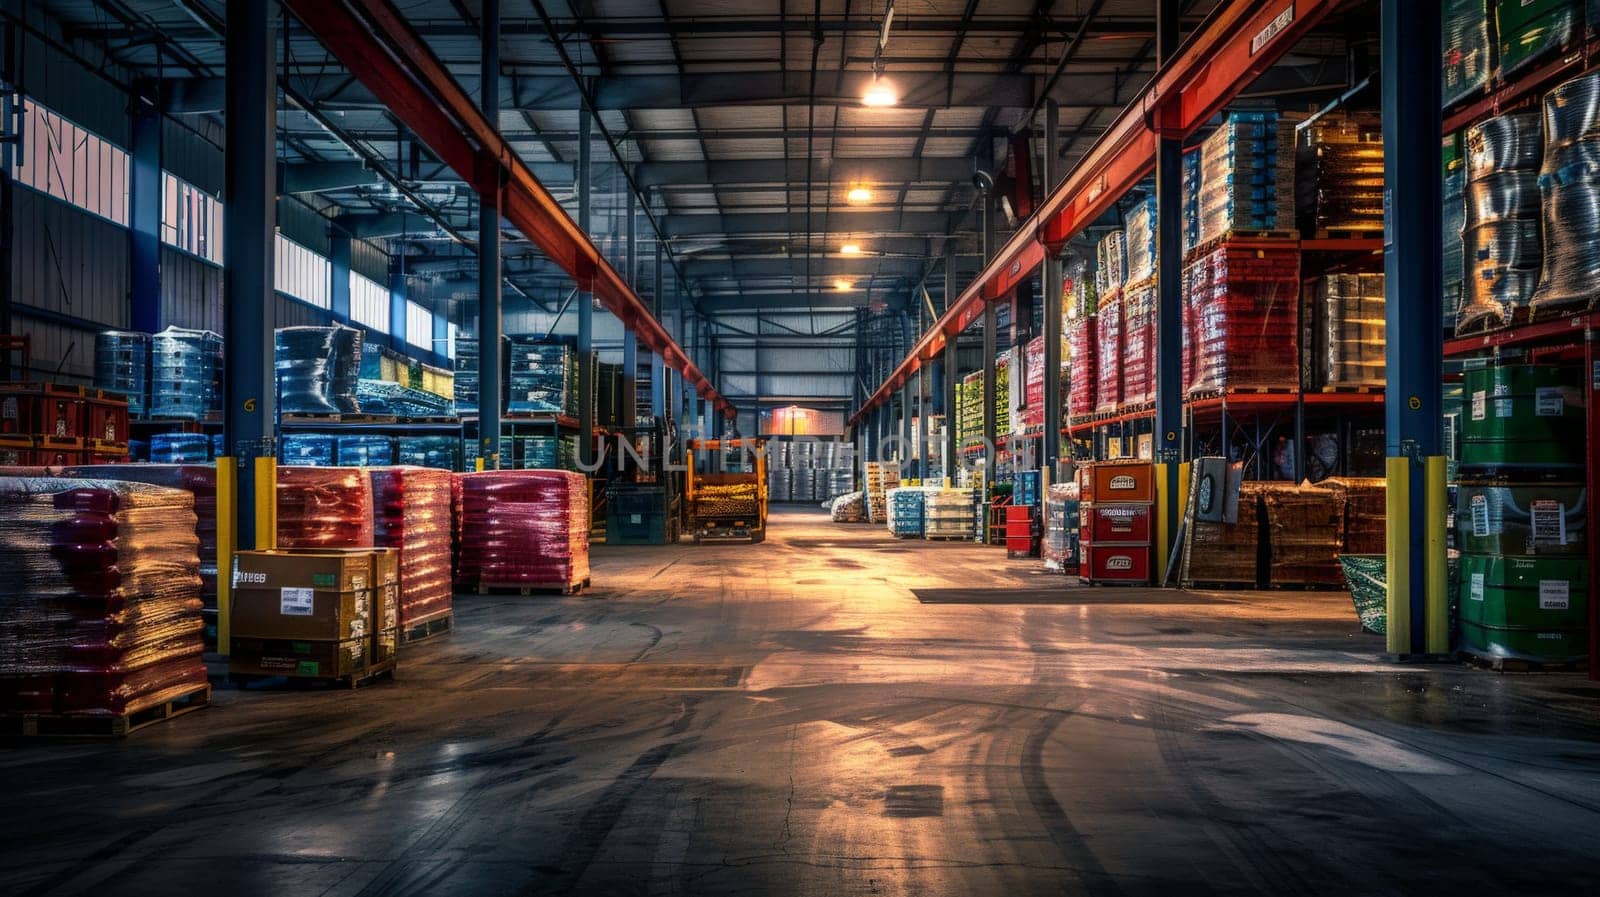 Photo of Warehouse Interior, Inventory Stacks, Industrial Environment.